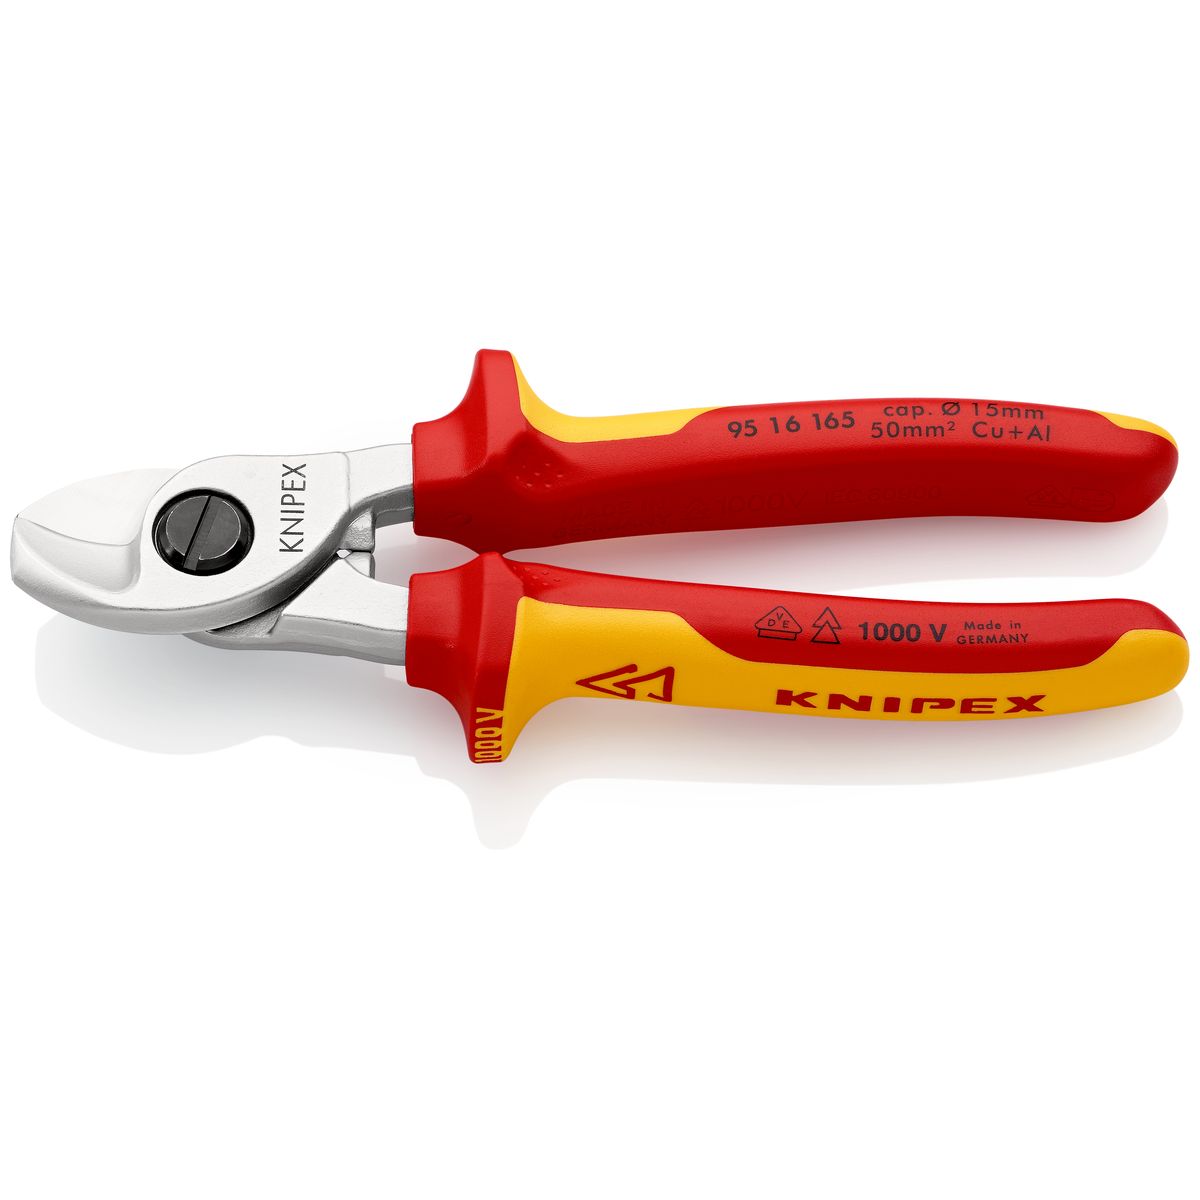 CABLE SHEARS 9516165 Knipex